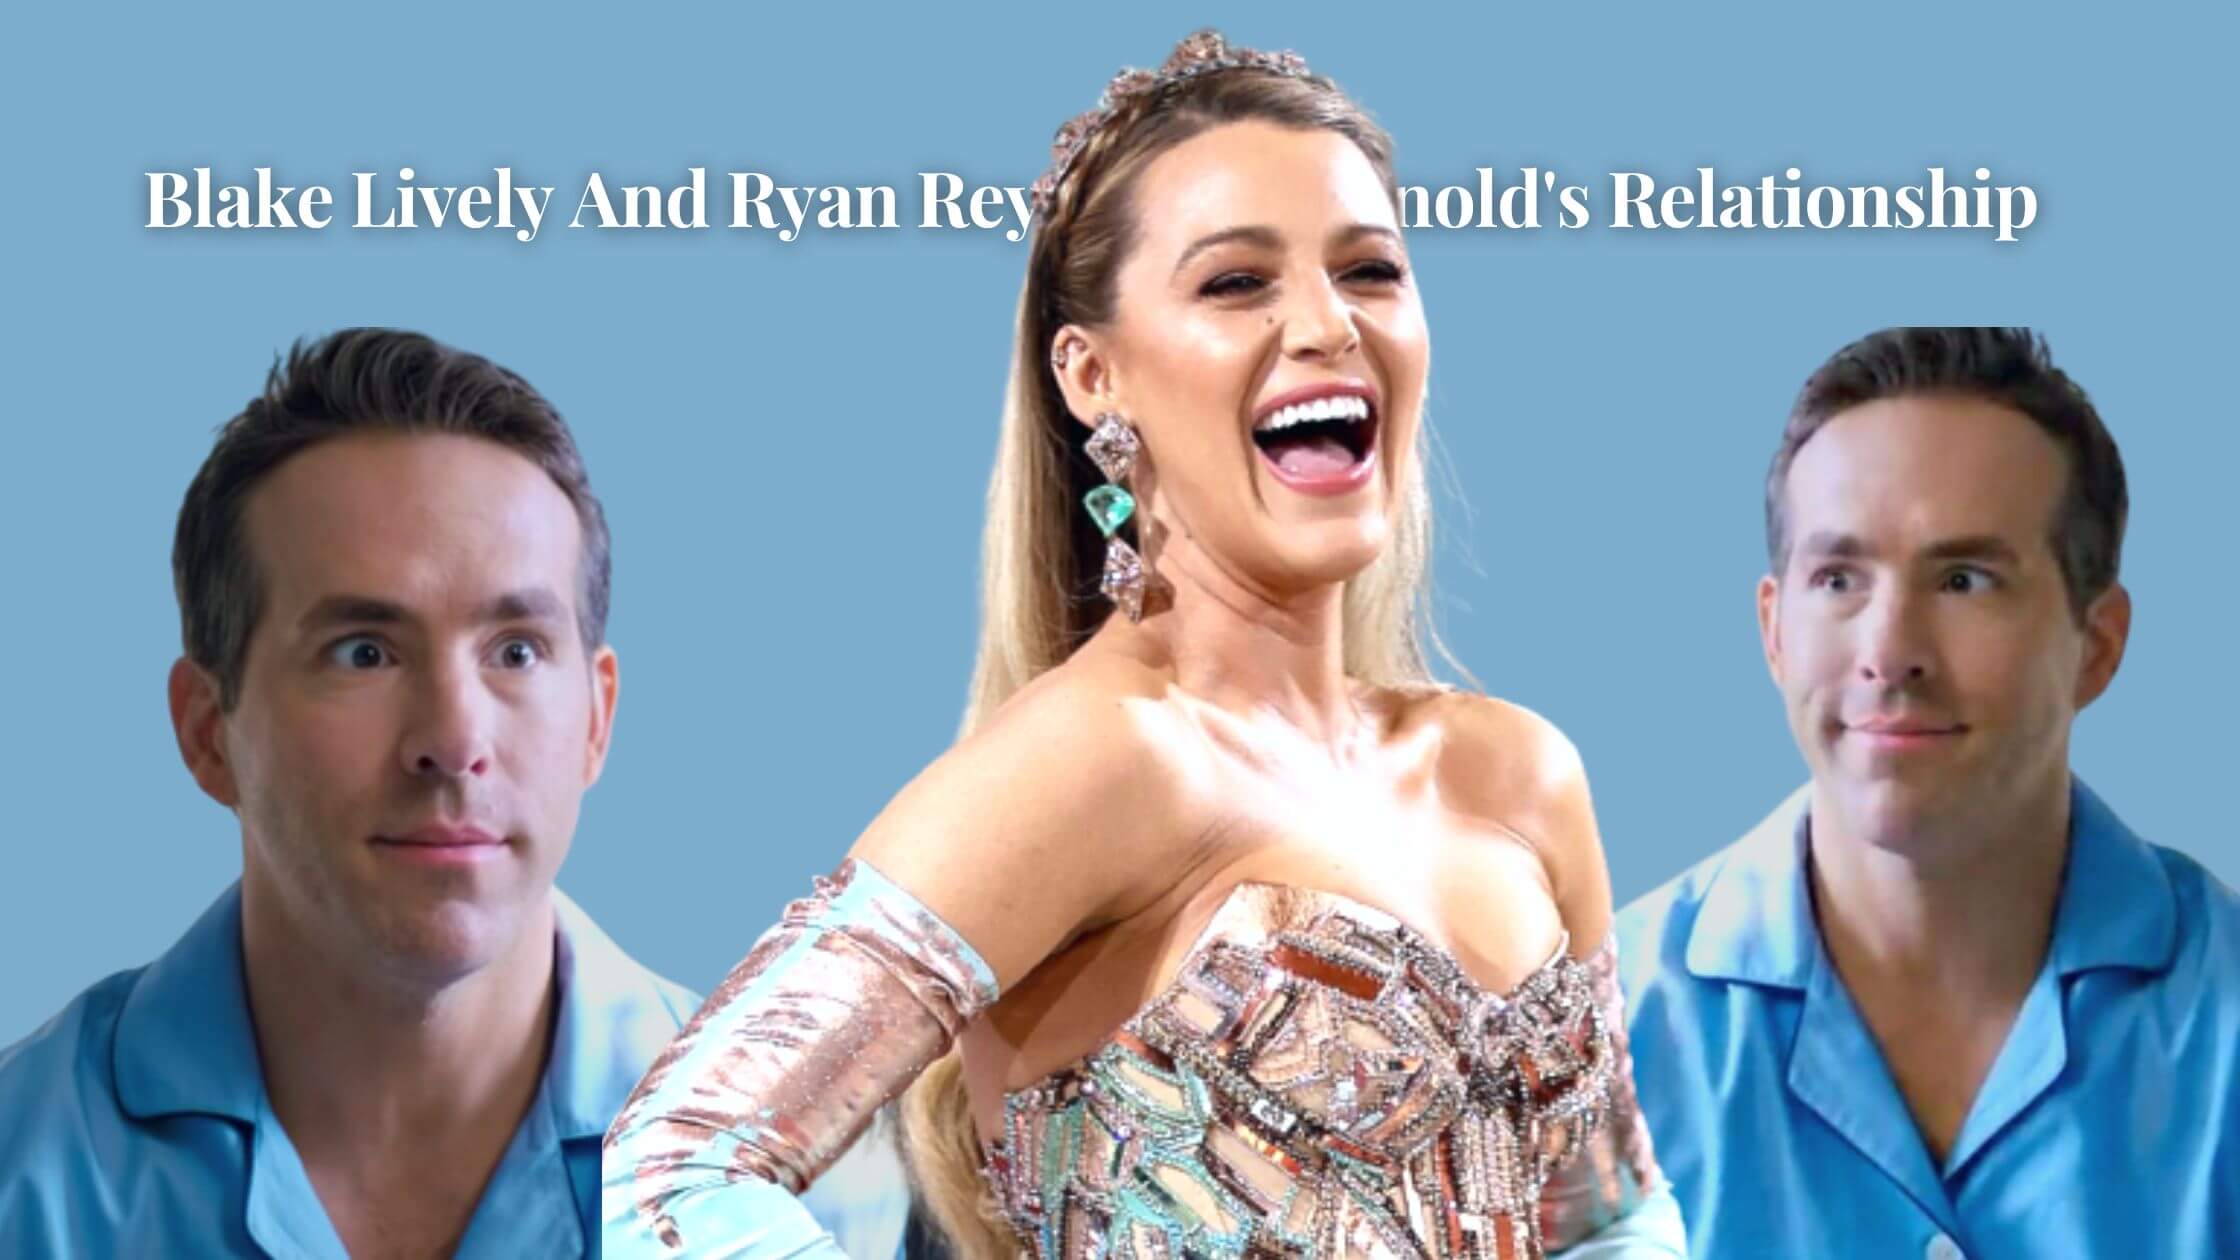 Who Is Ryan Reynolds Blake Lively And Ryan Reynolds's Relationship